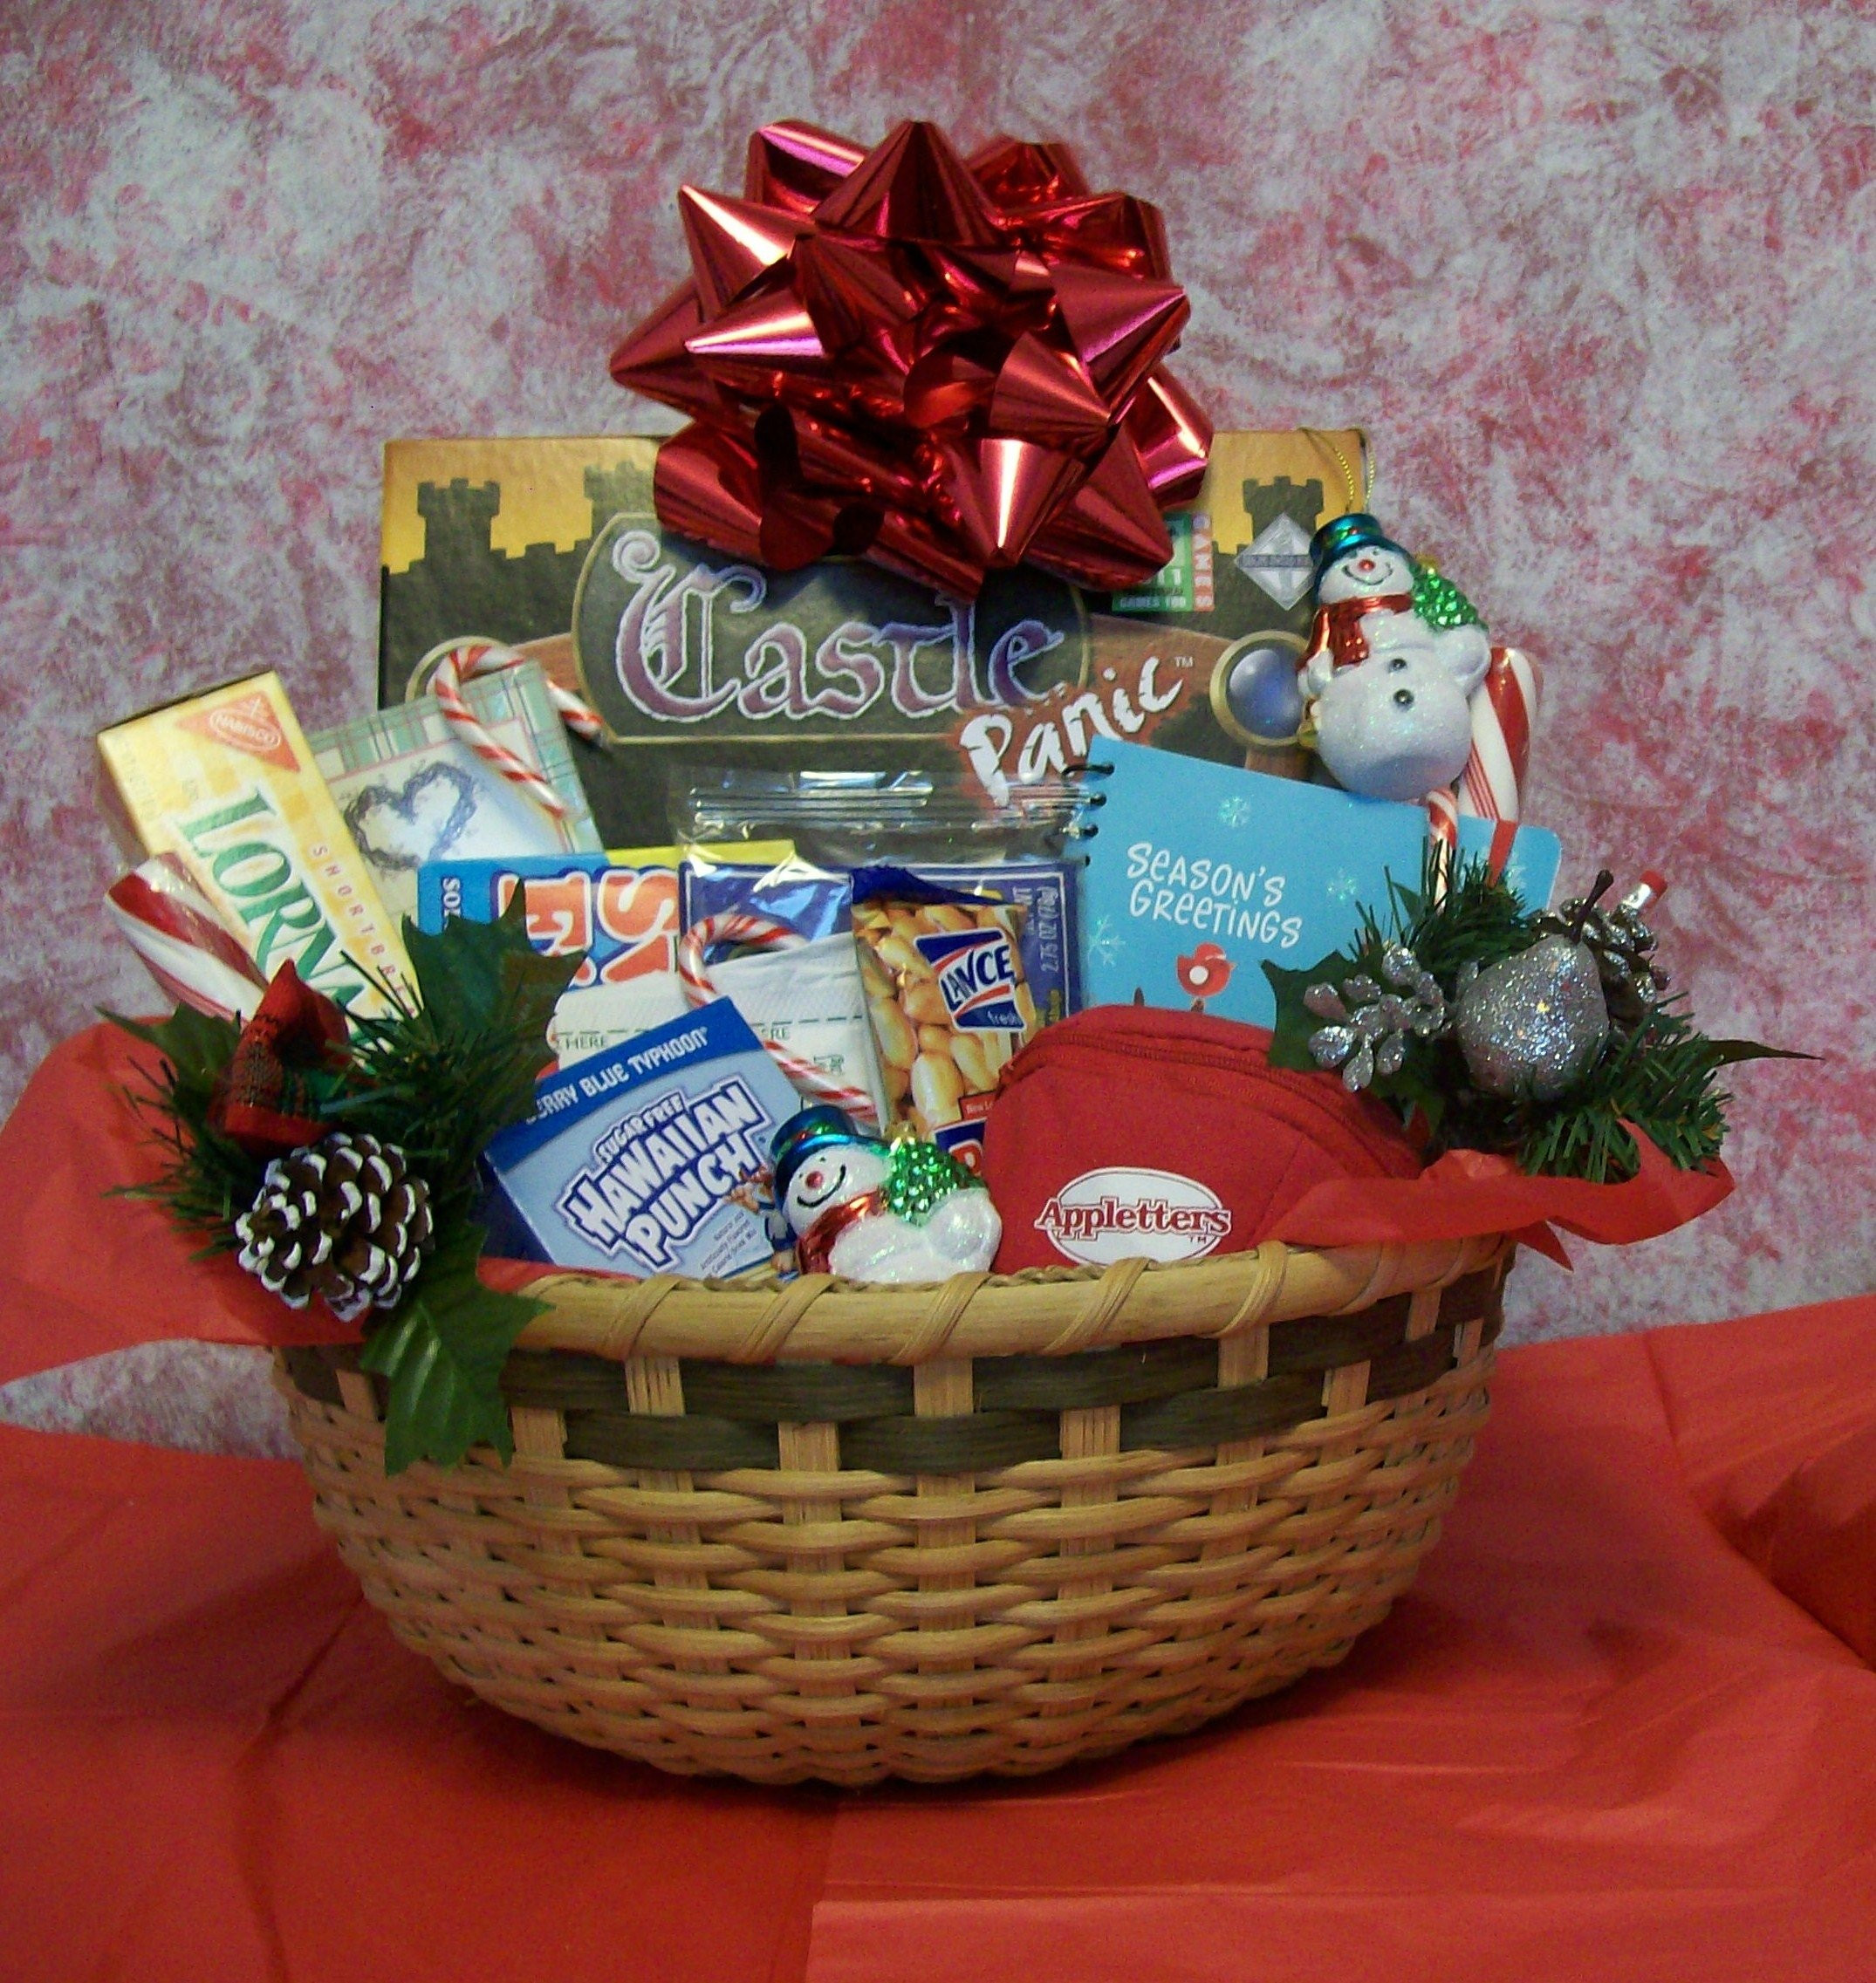 Gift Ideas For Couples
 10 Stylish Christmas Gift Basket Ideas For Couples 2020